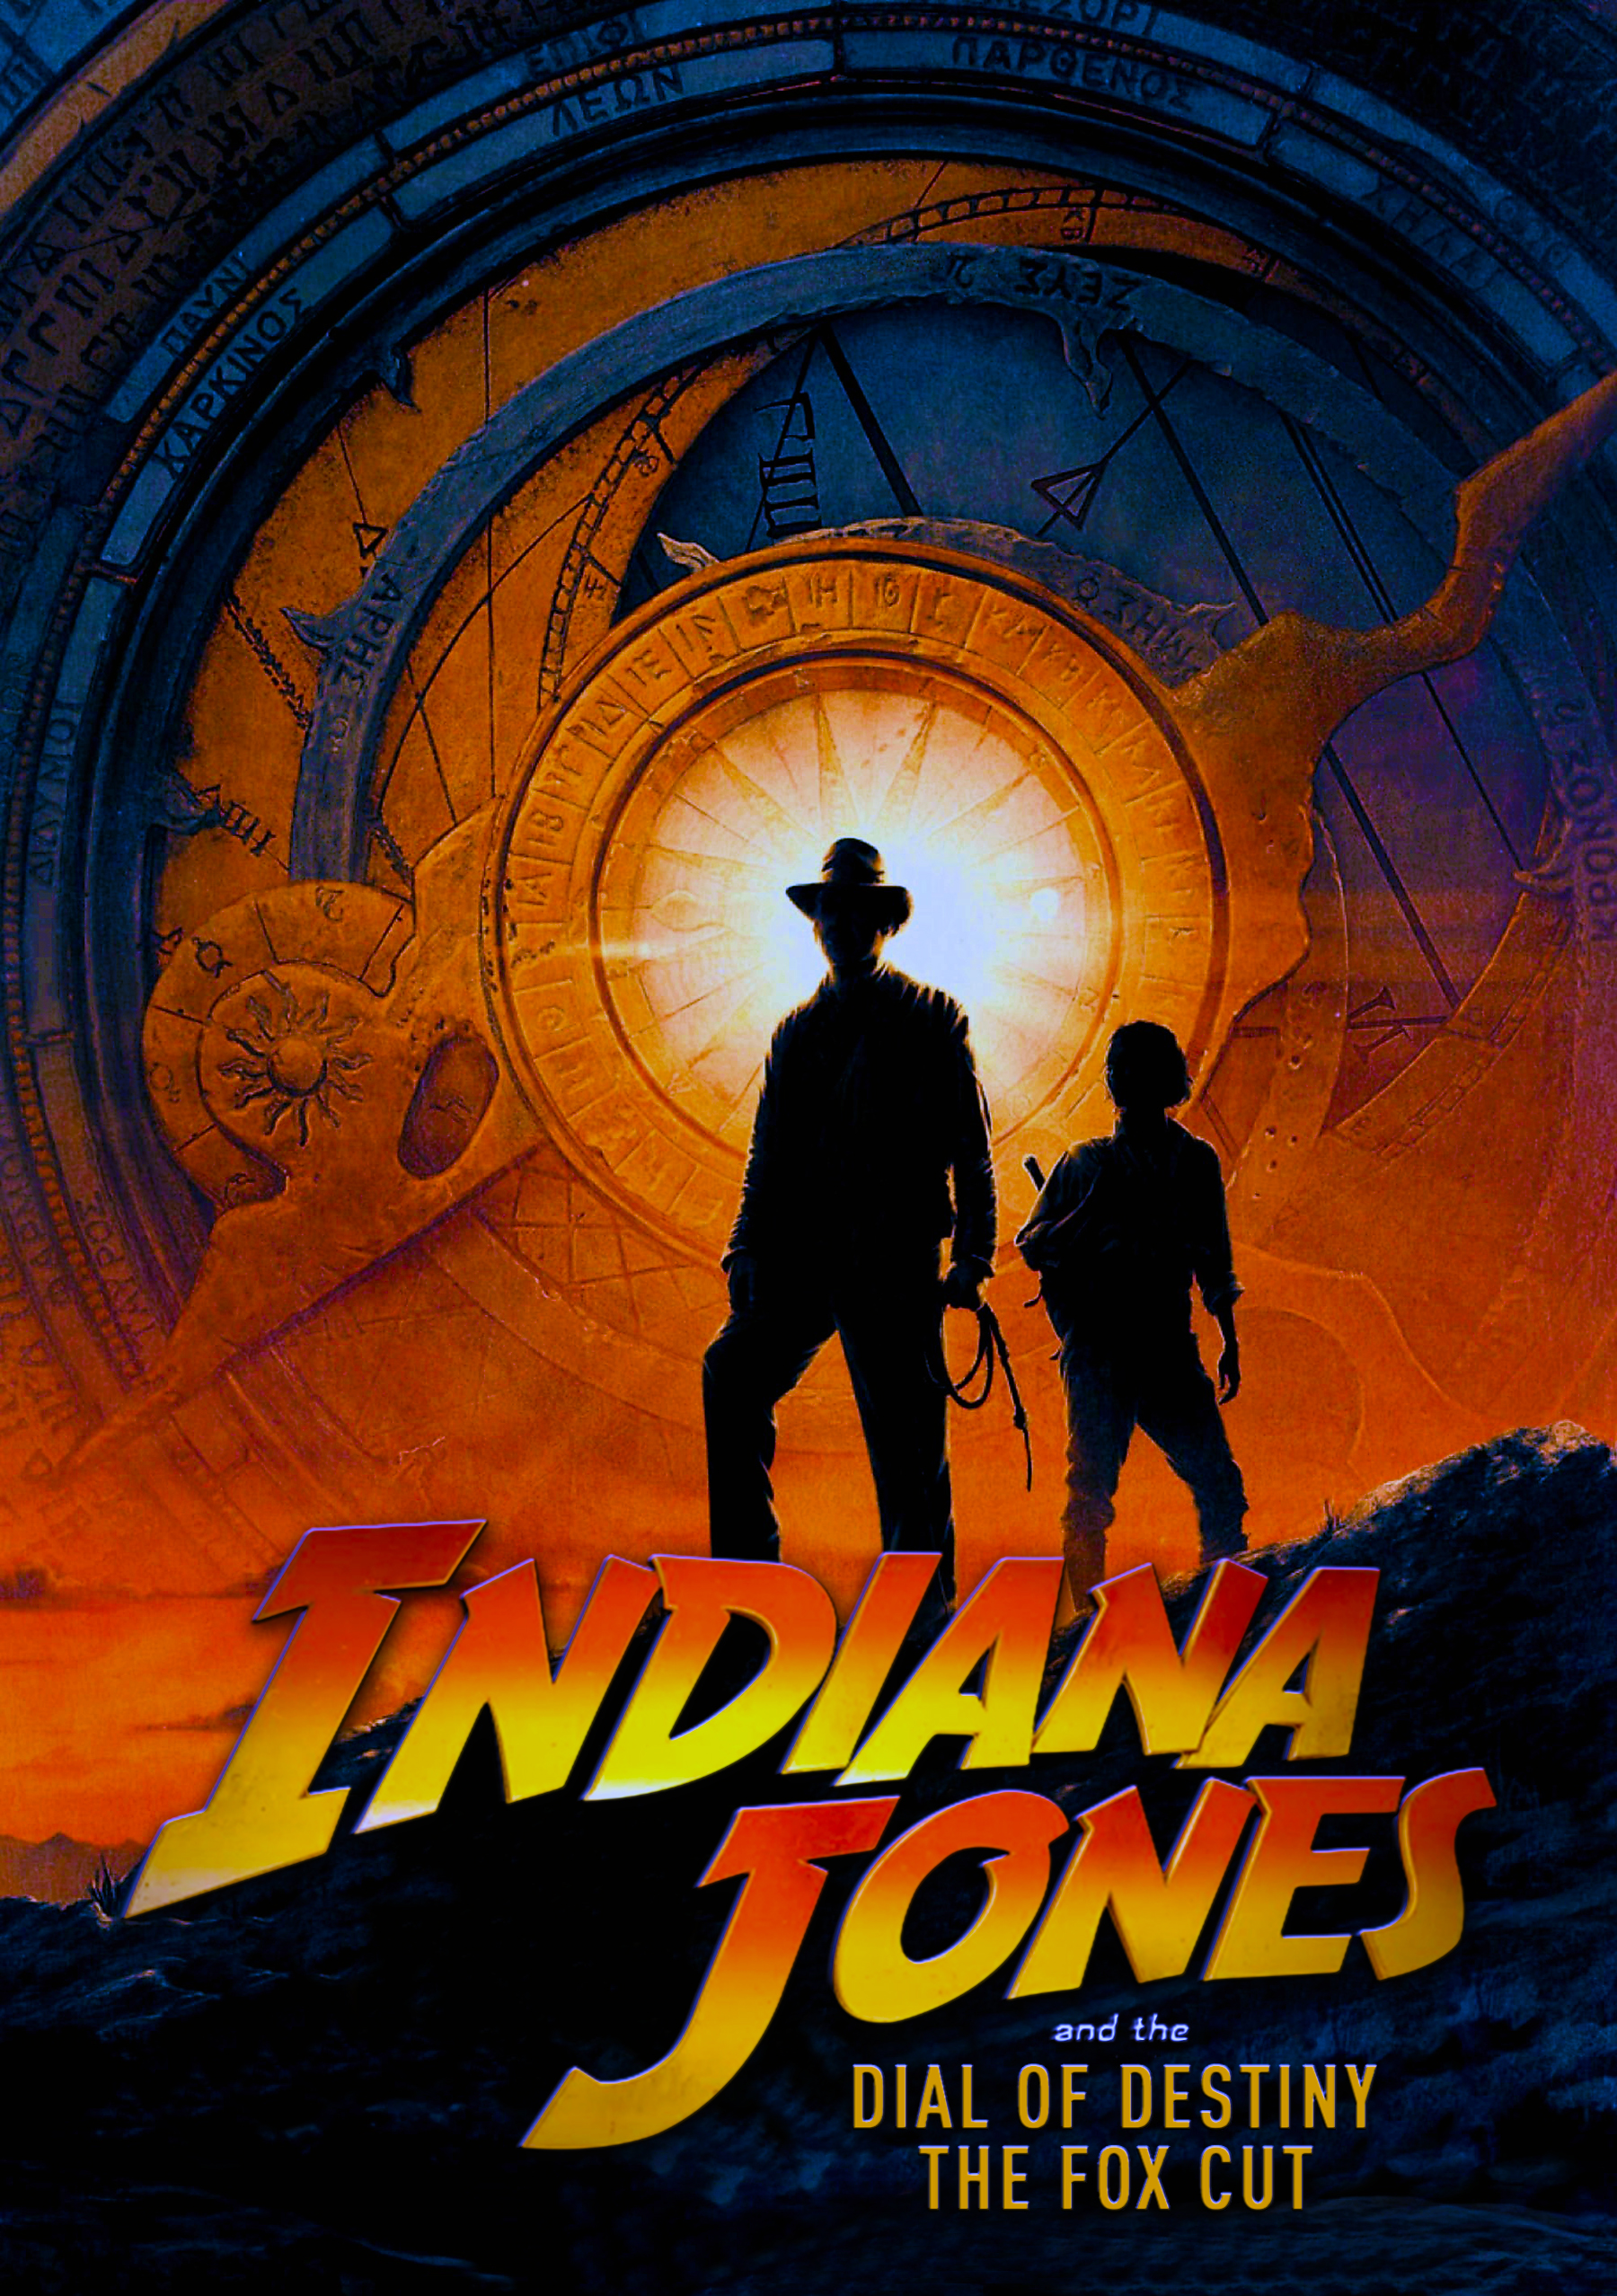 Indiana Jones and the Dial of Destiny - The Fox Cut